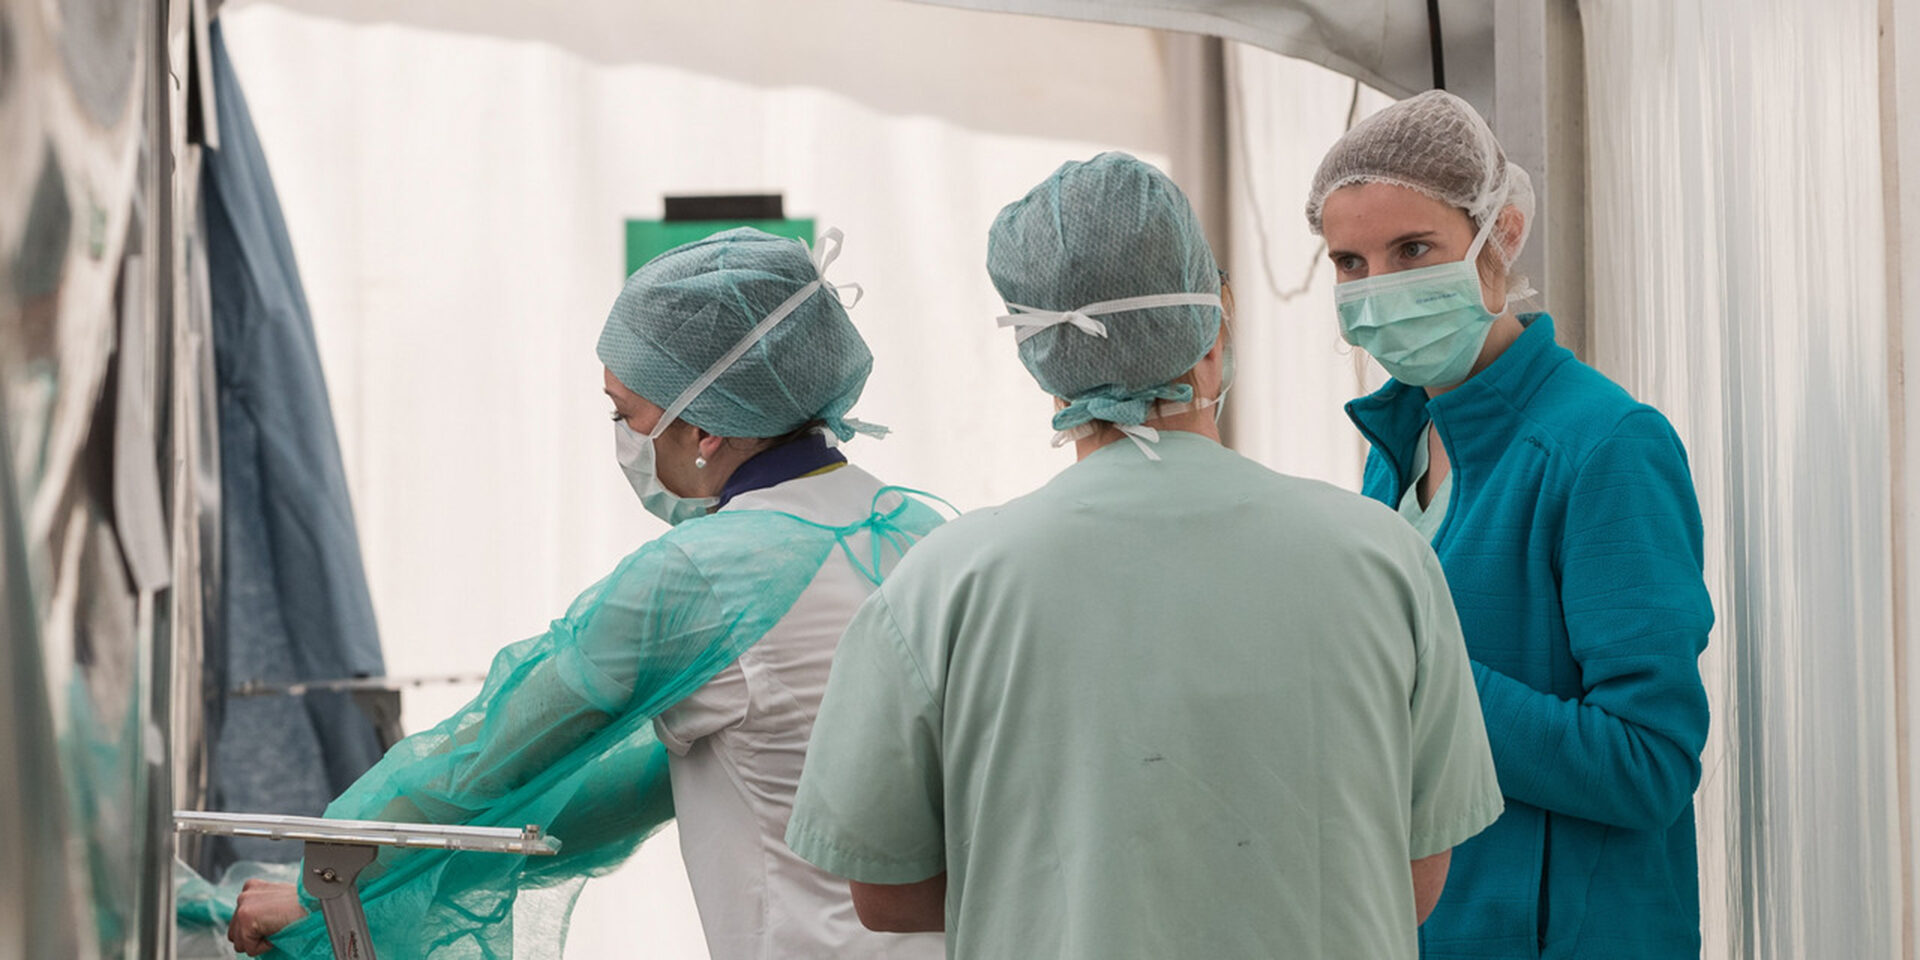 Three healthcare workers wearing scrubs and protective masks standing outside of an operating room.